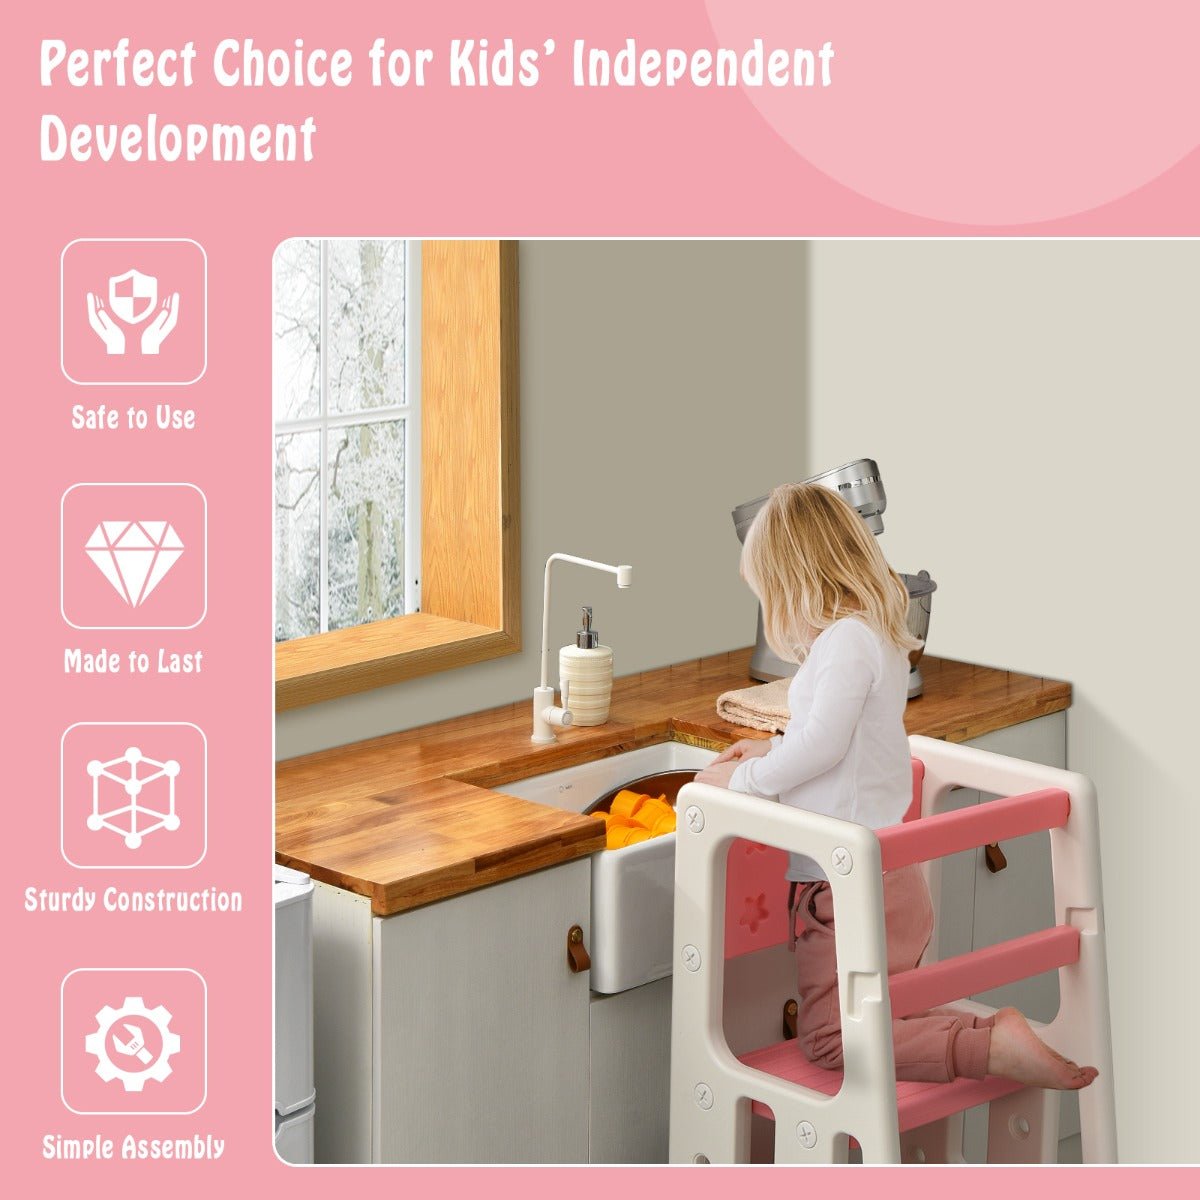 Children's Step Stool with Safety Rails - Support Independence